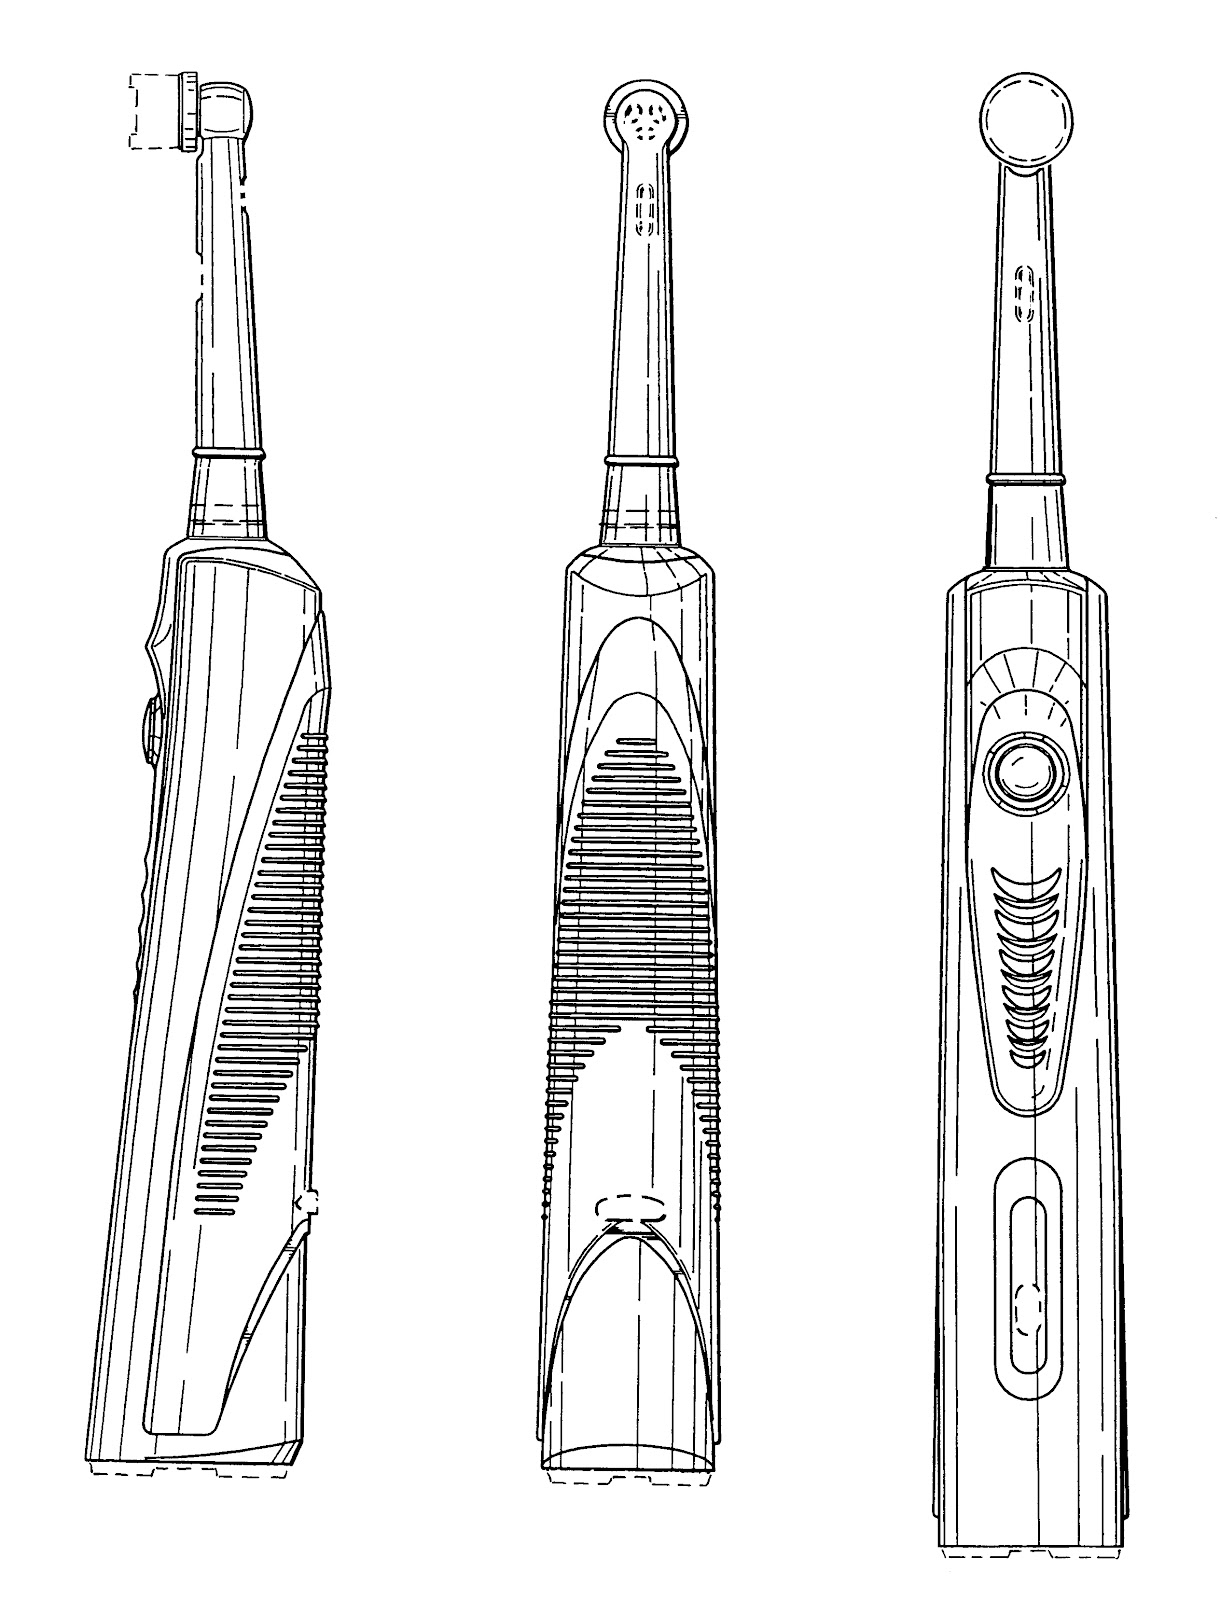 FLORI HYSI: How Electric Toothbrushes Are Made & Works